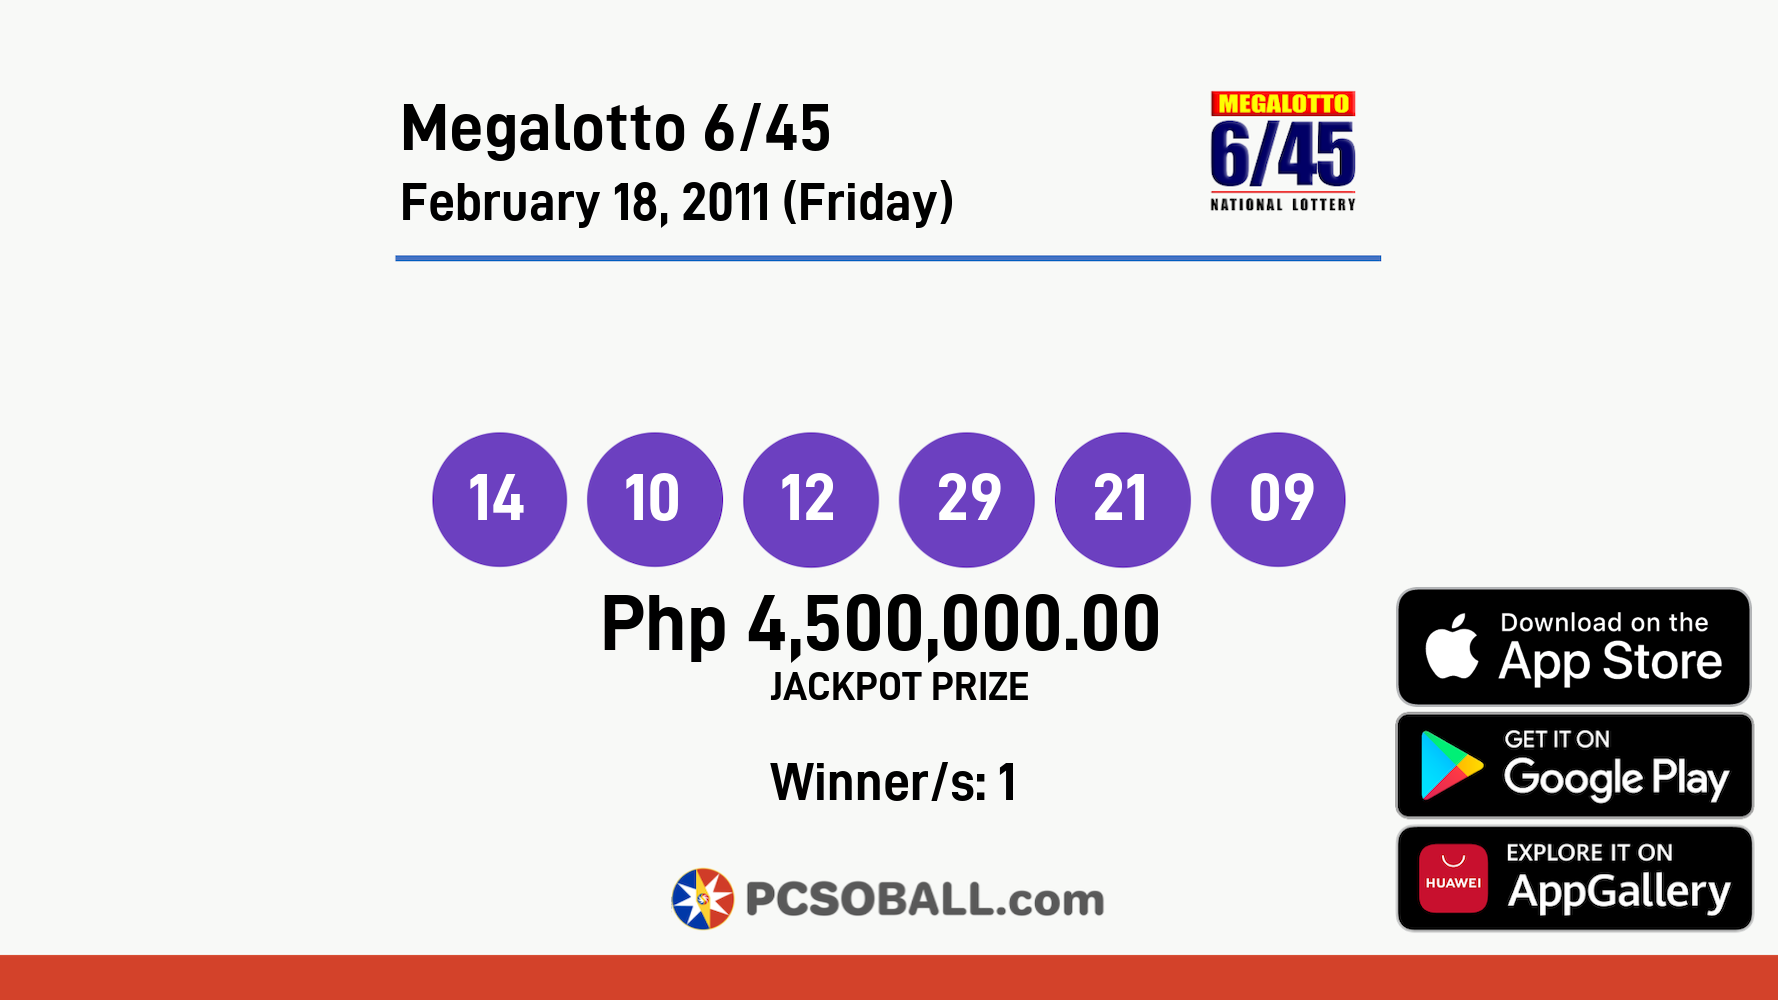 Megalotto 6/45 February 18, 2011 (Friday) Result